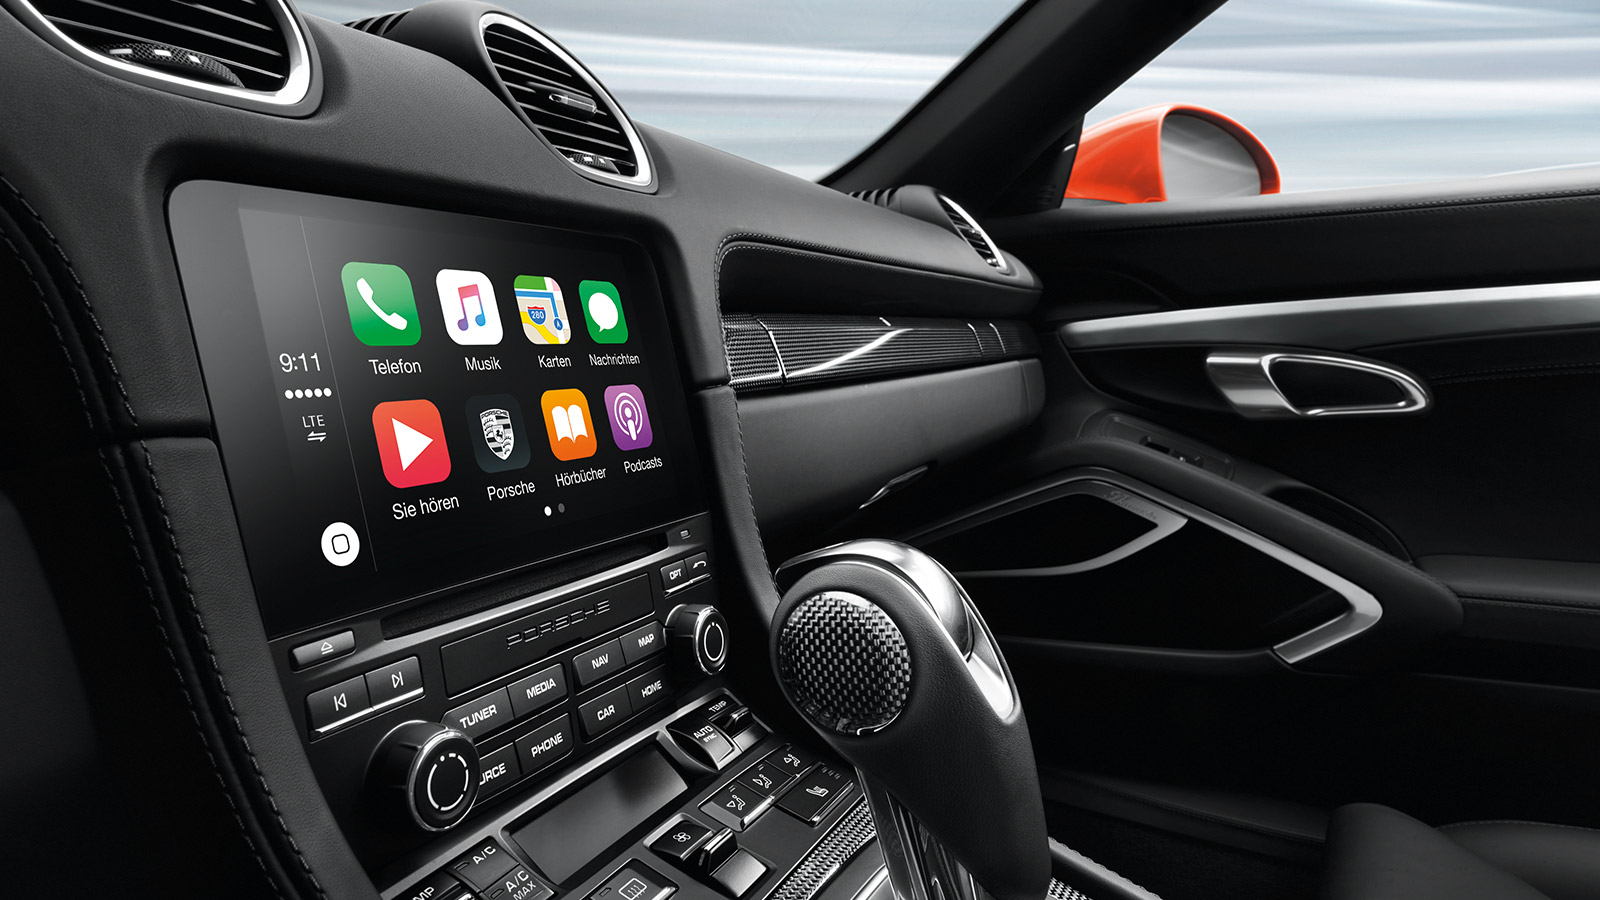 This is what the current Porsche interface looks like